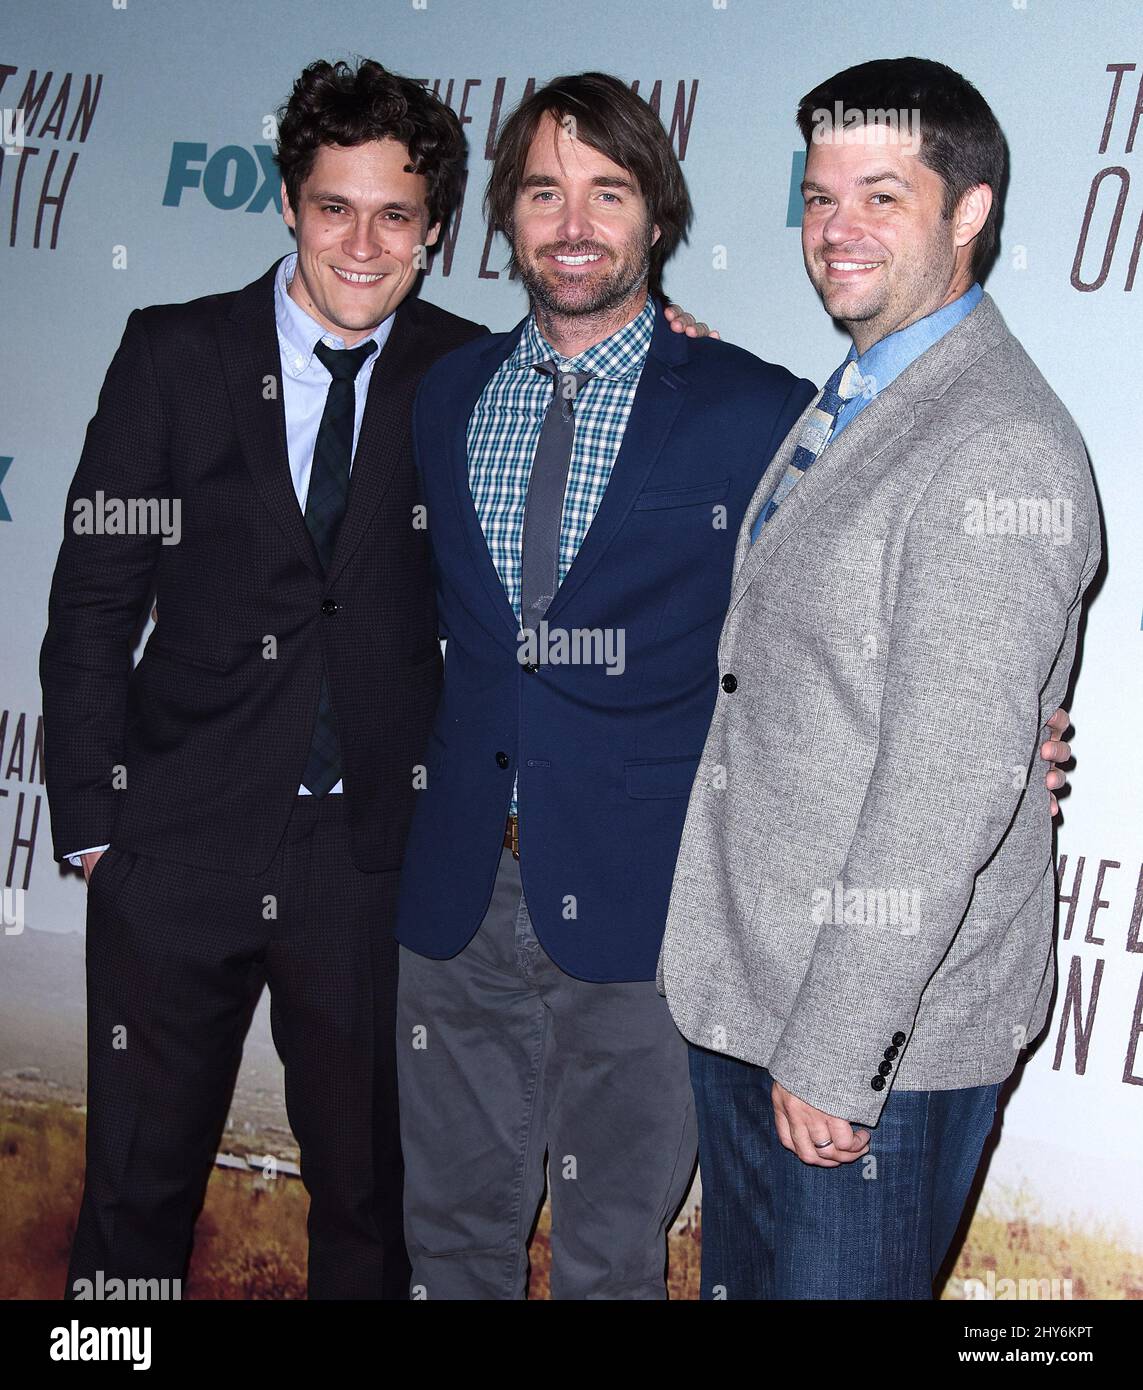 Will Forte, Phil Lord, Chris Miller attending the premiere party of 'The Last Man On Earth' in Los Angeles Stock Photo